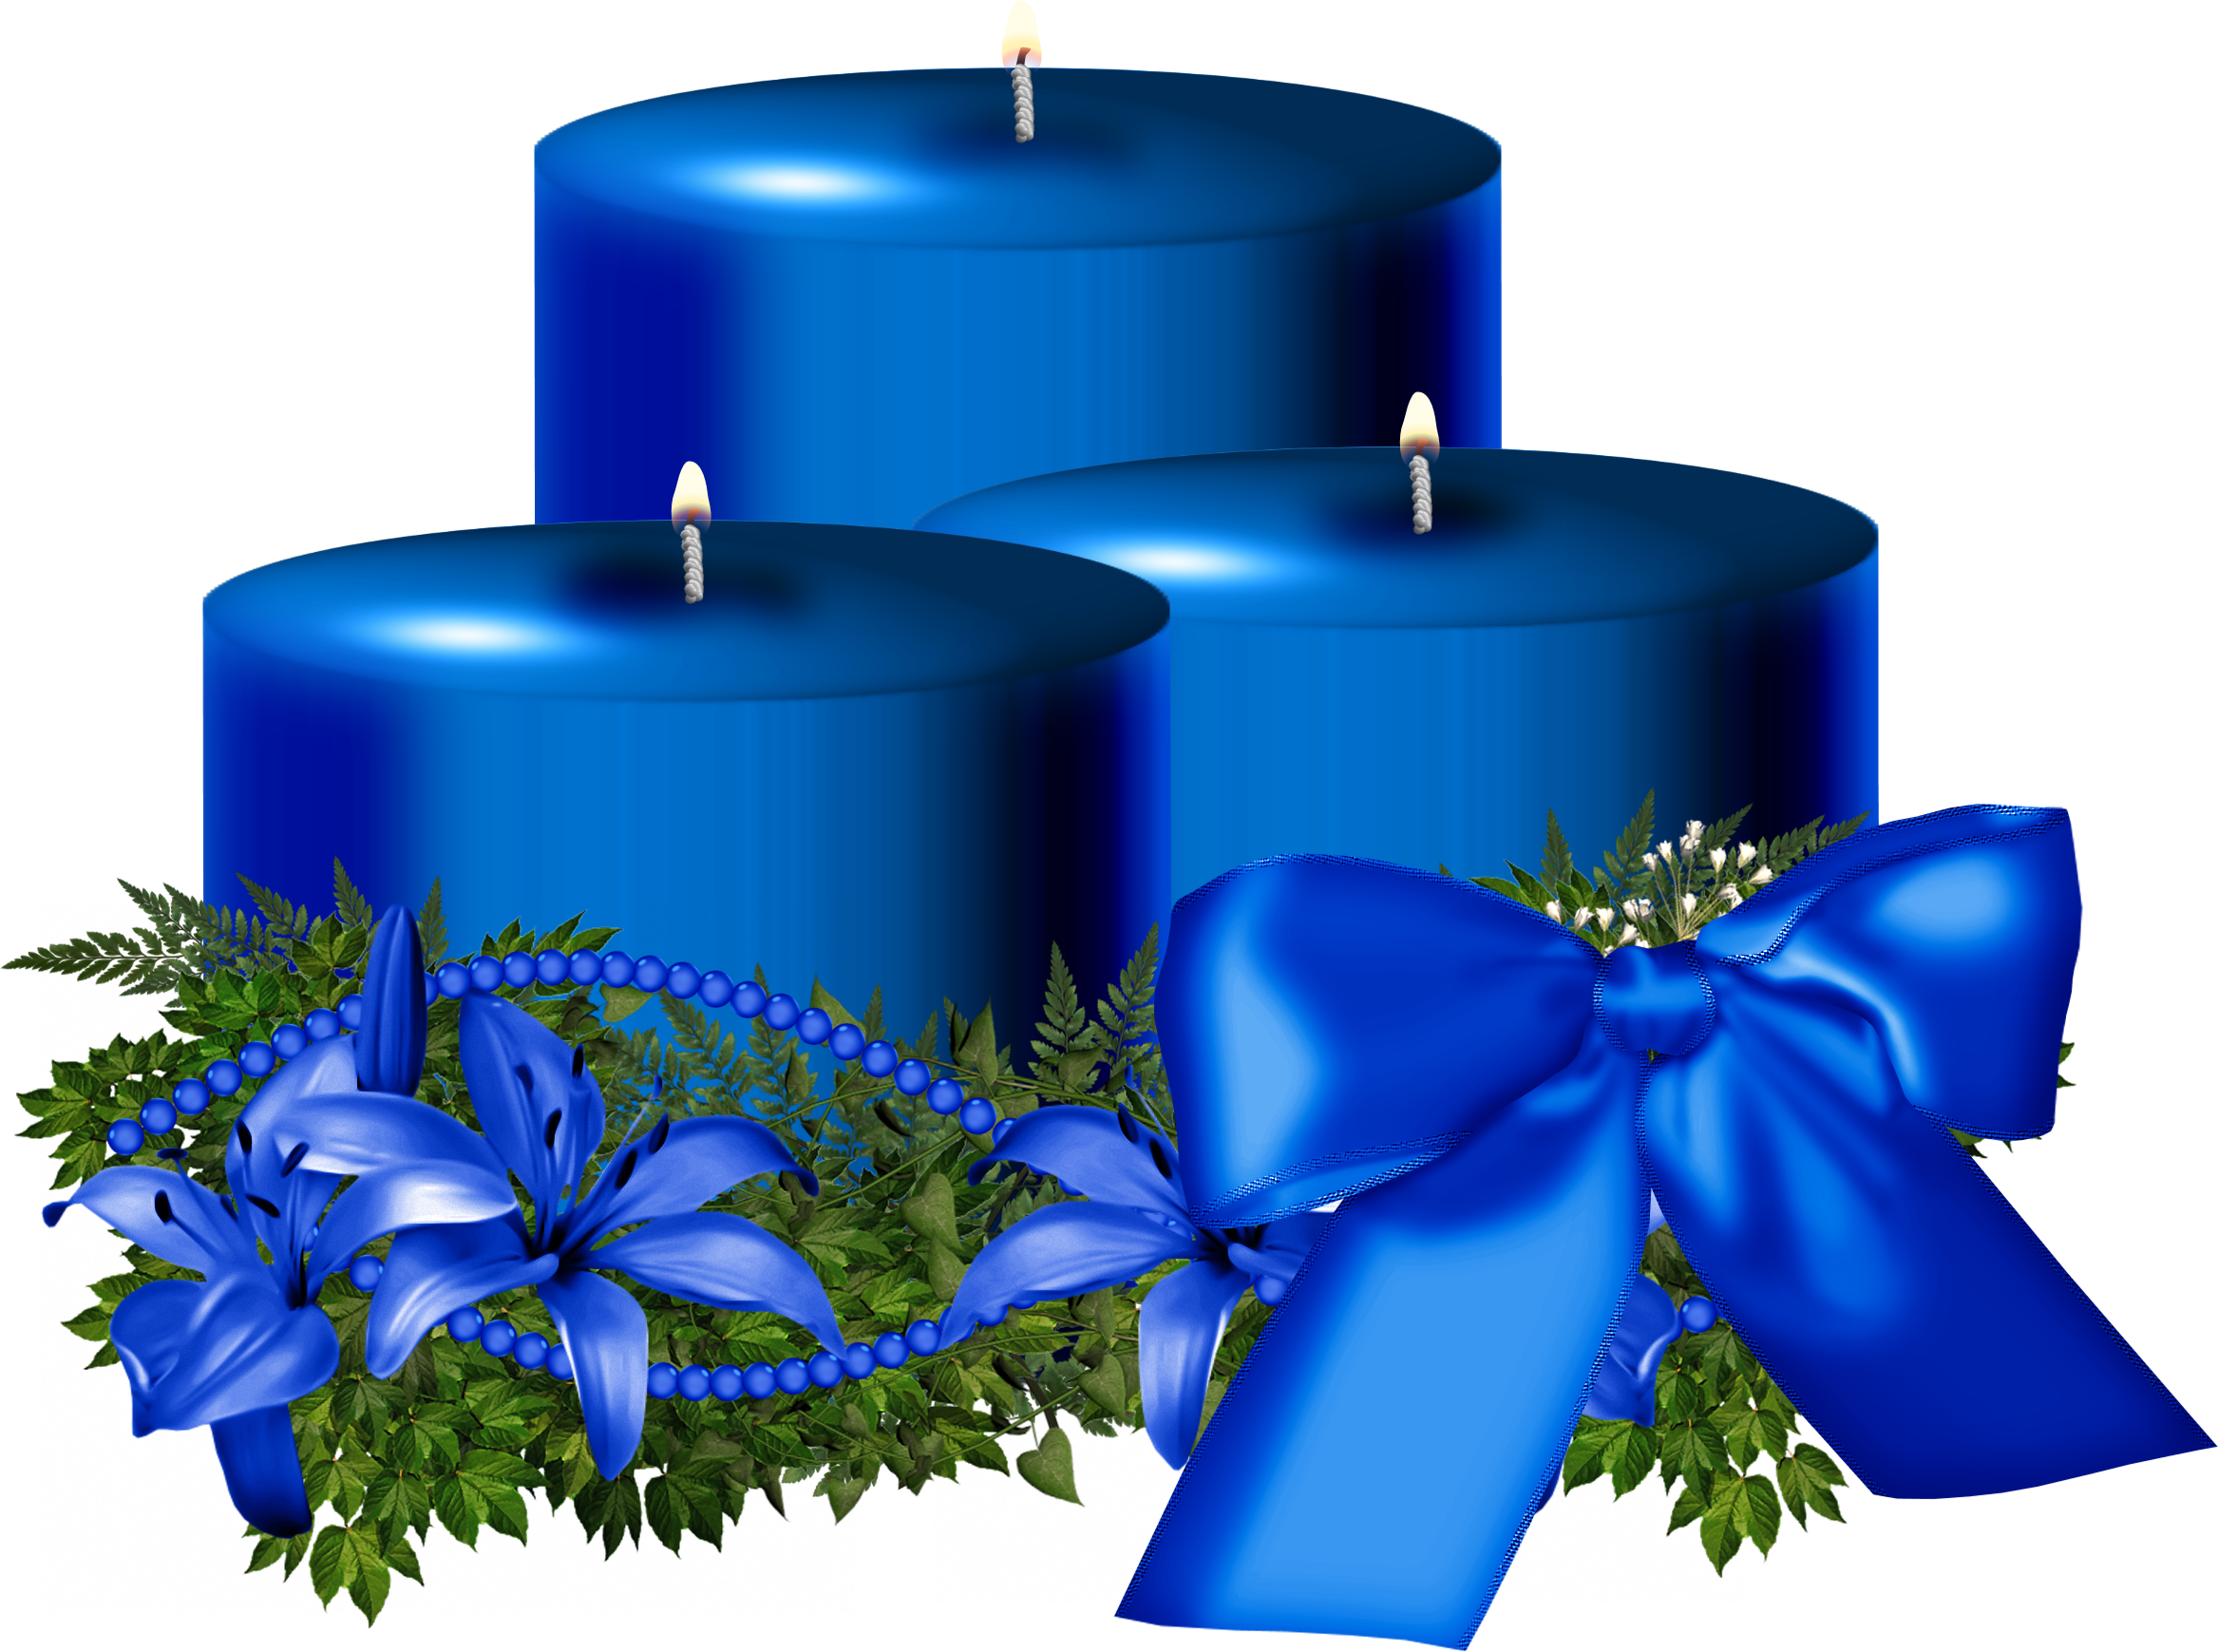 Blue Candle Christmas HQ Image Free PNG Image